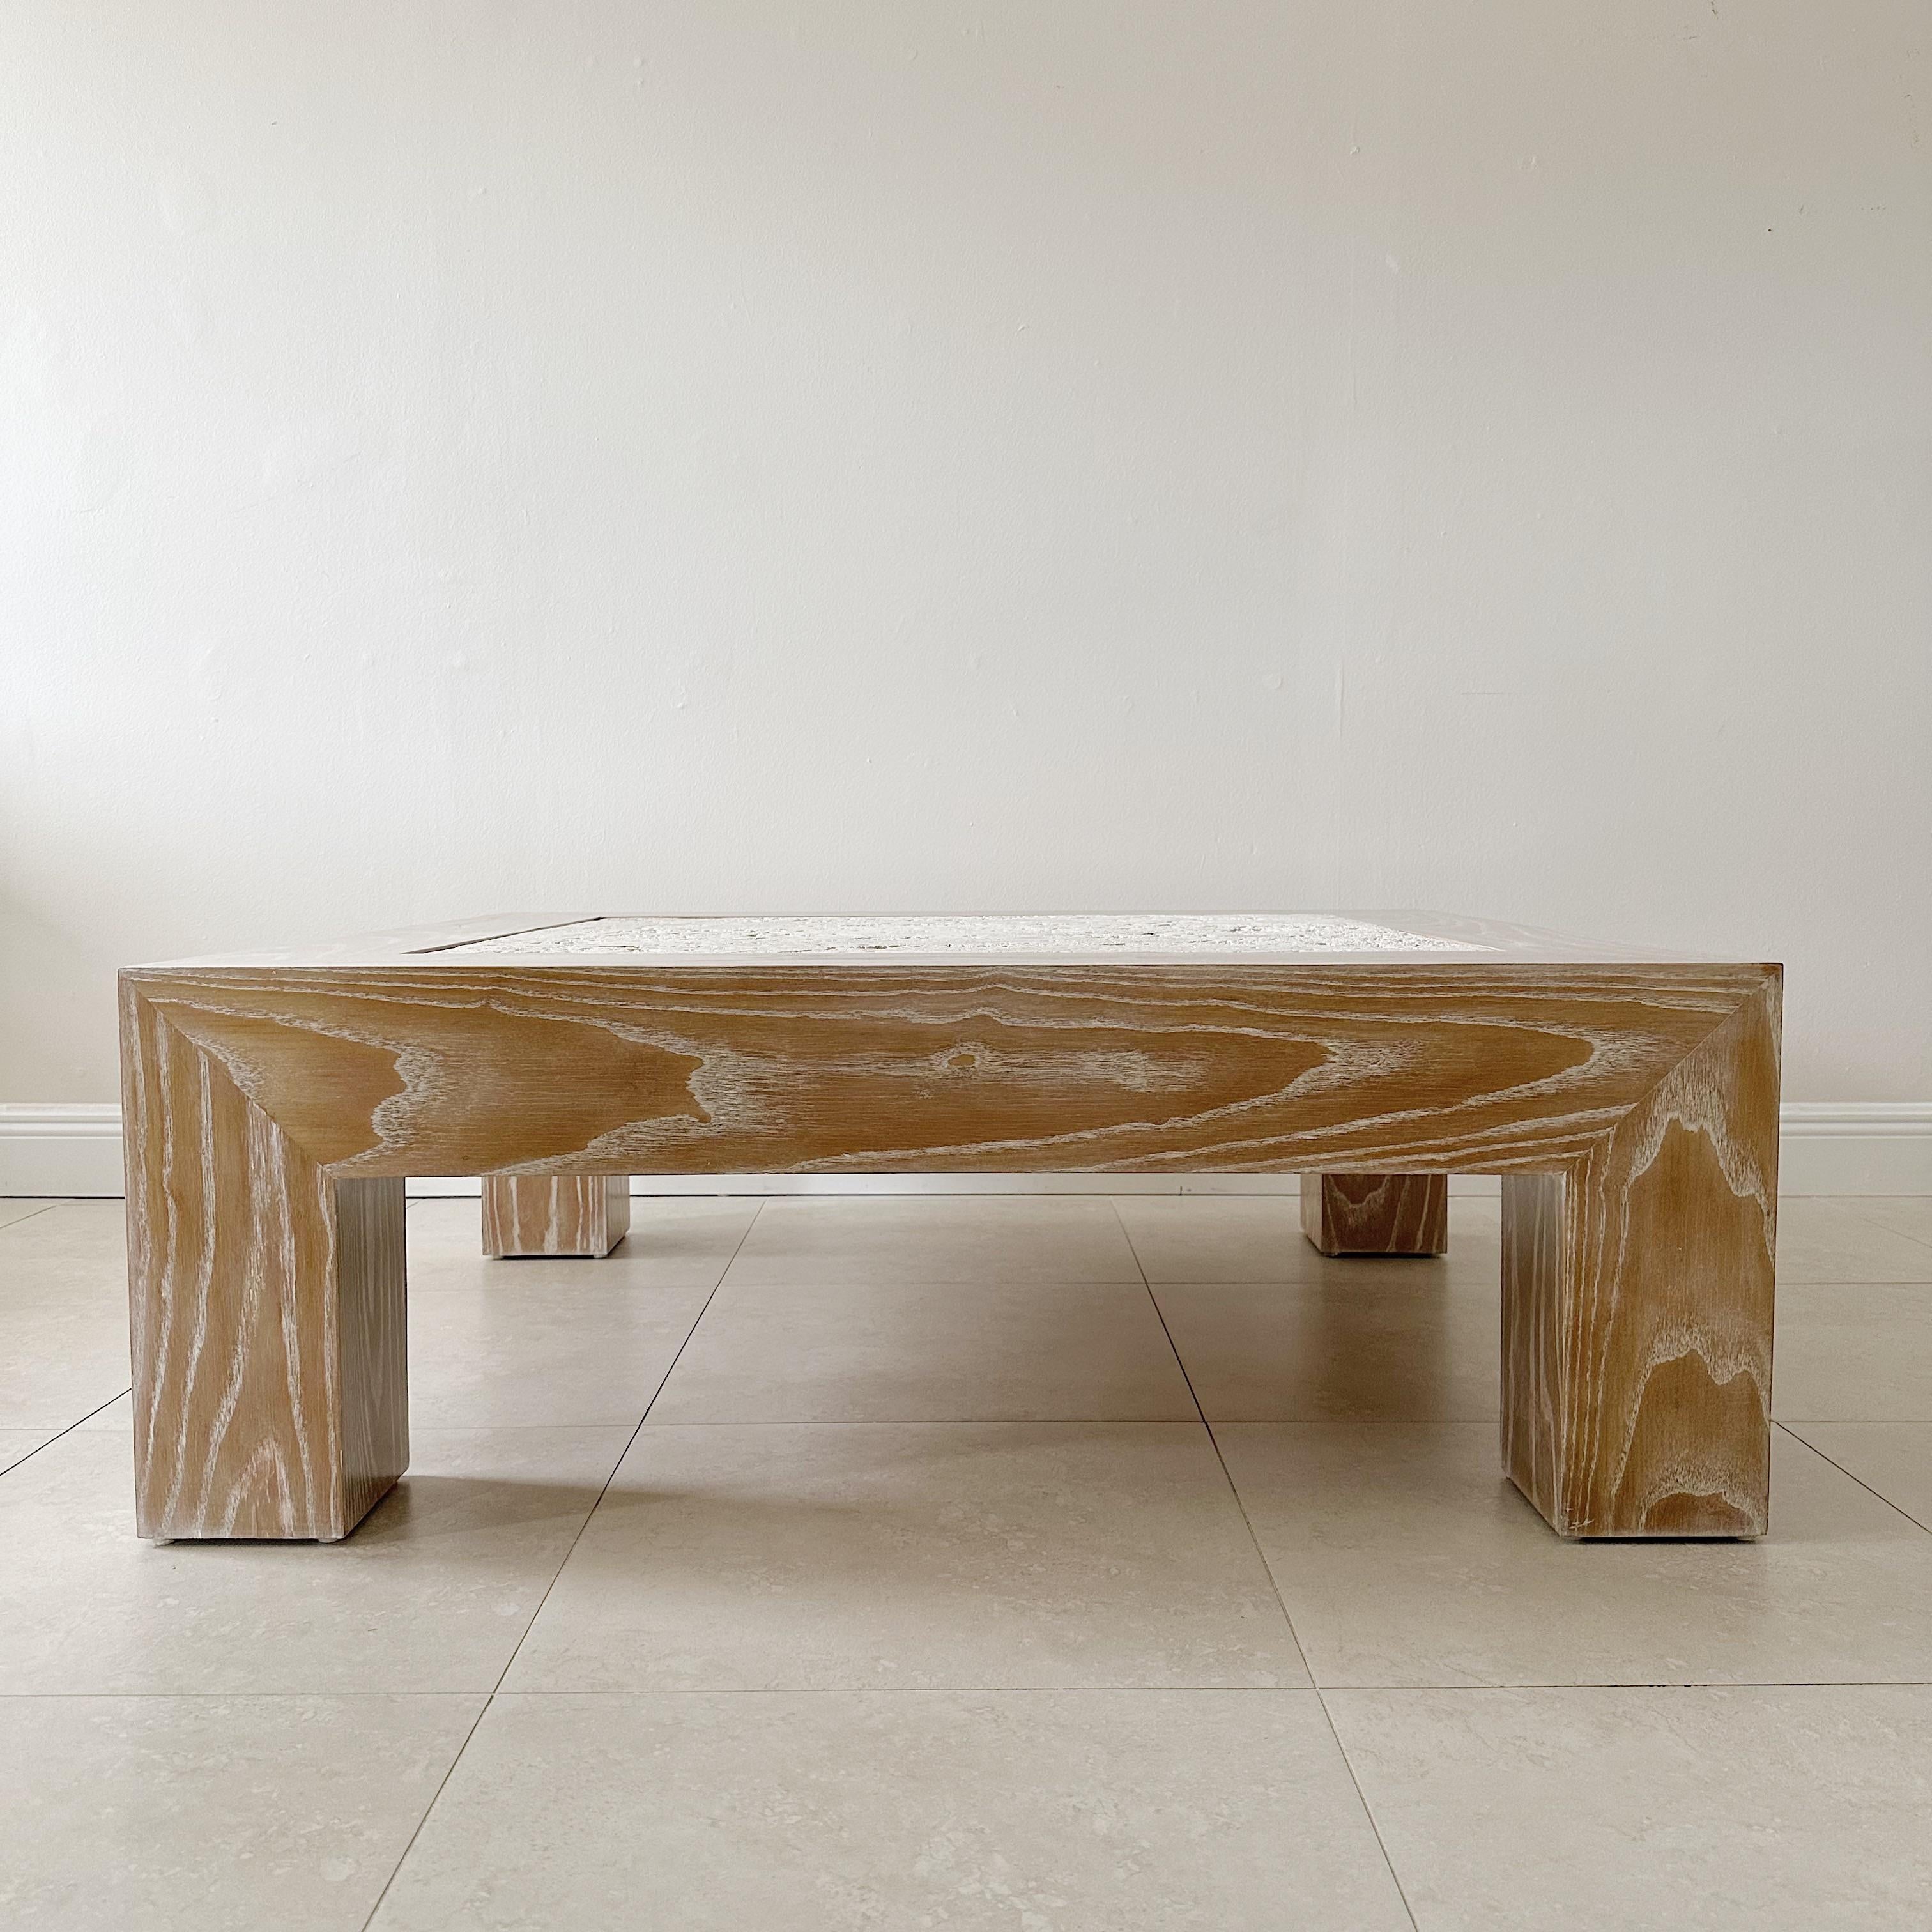 Professionally restored coffee table from the 1970s, featuring an organic 2-inch thick solid coral coquina stone insert set into the cerused oak table base. This unique combination of materials creates a stunning visual effect, with the natural